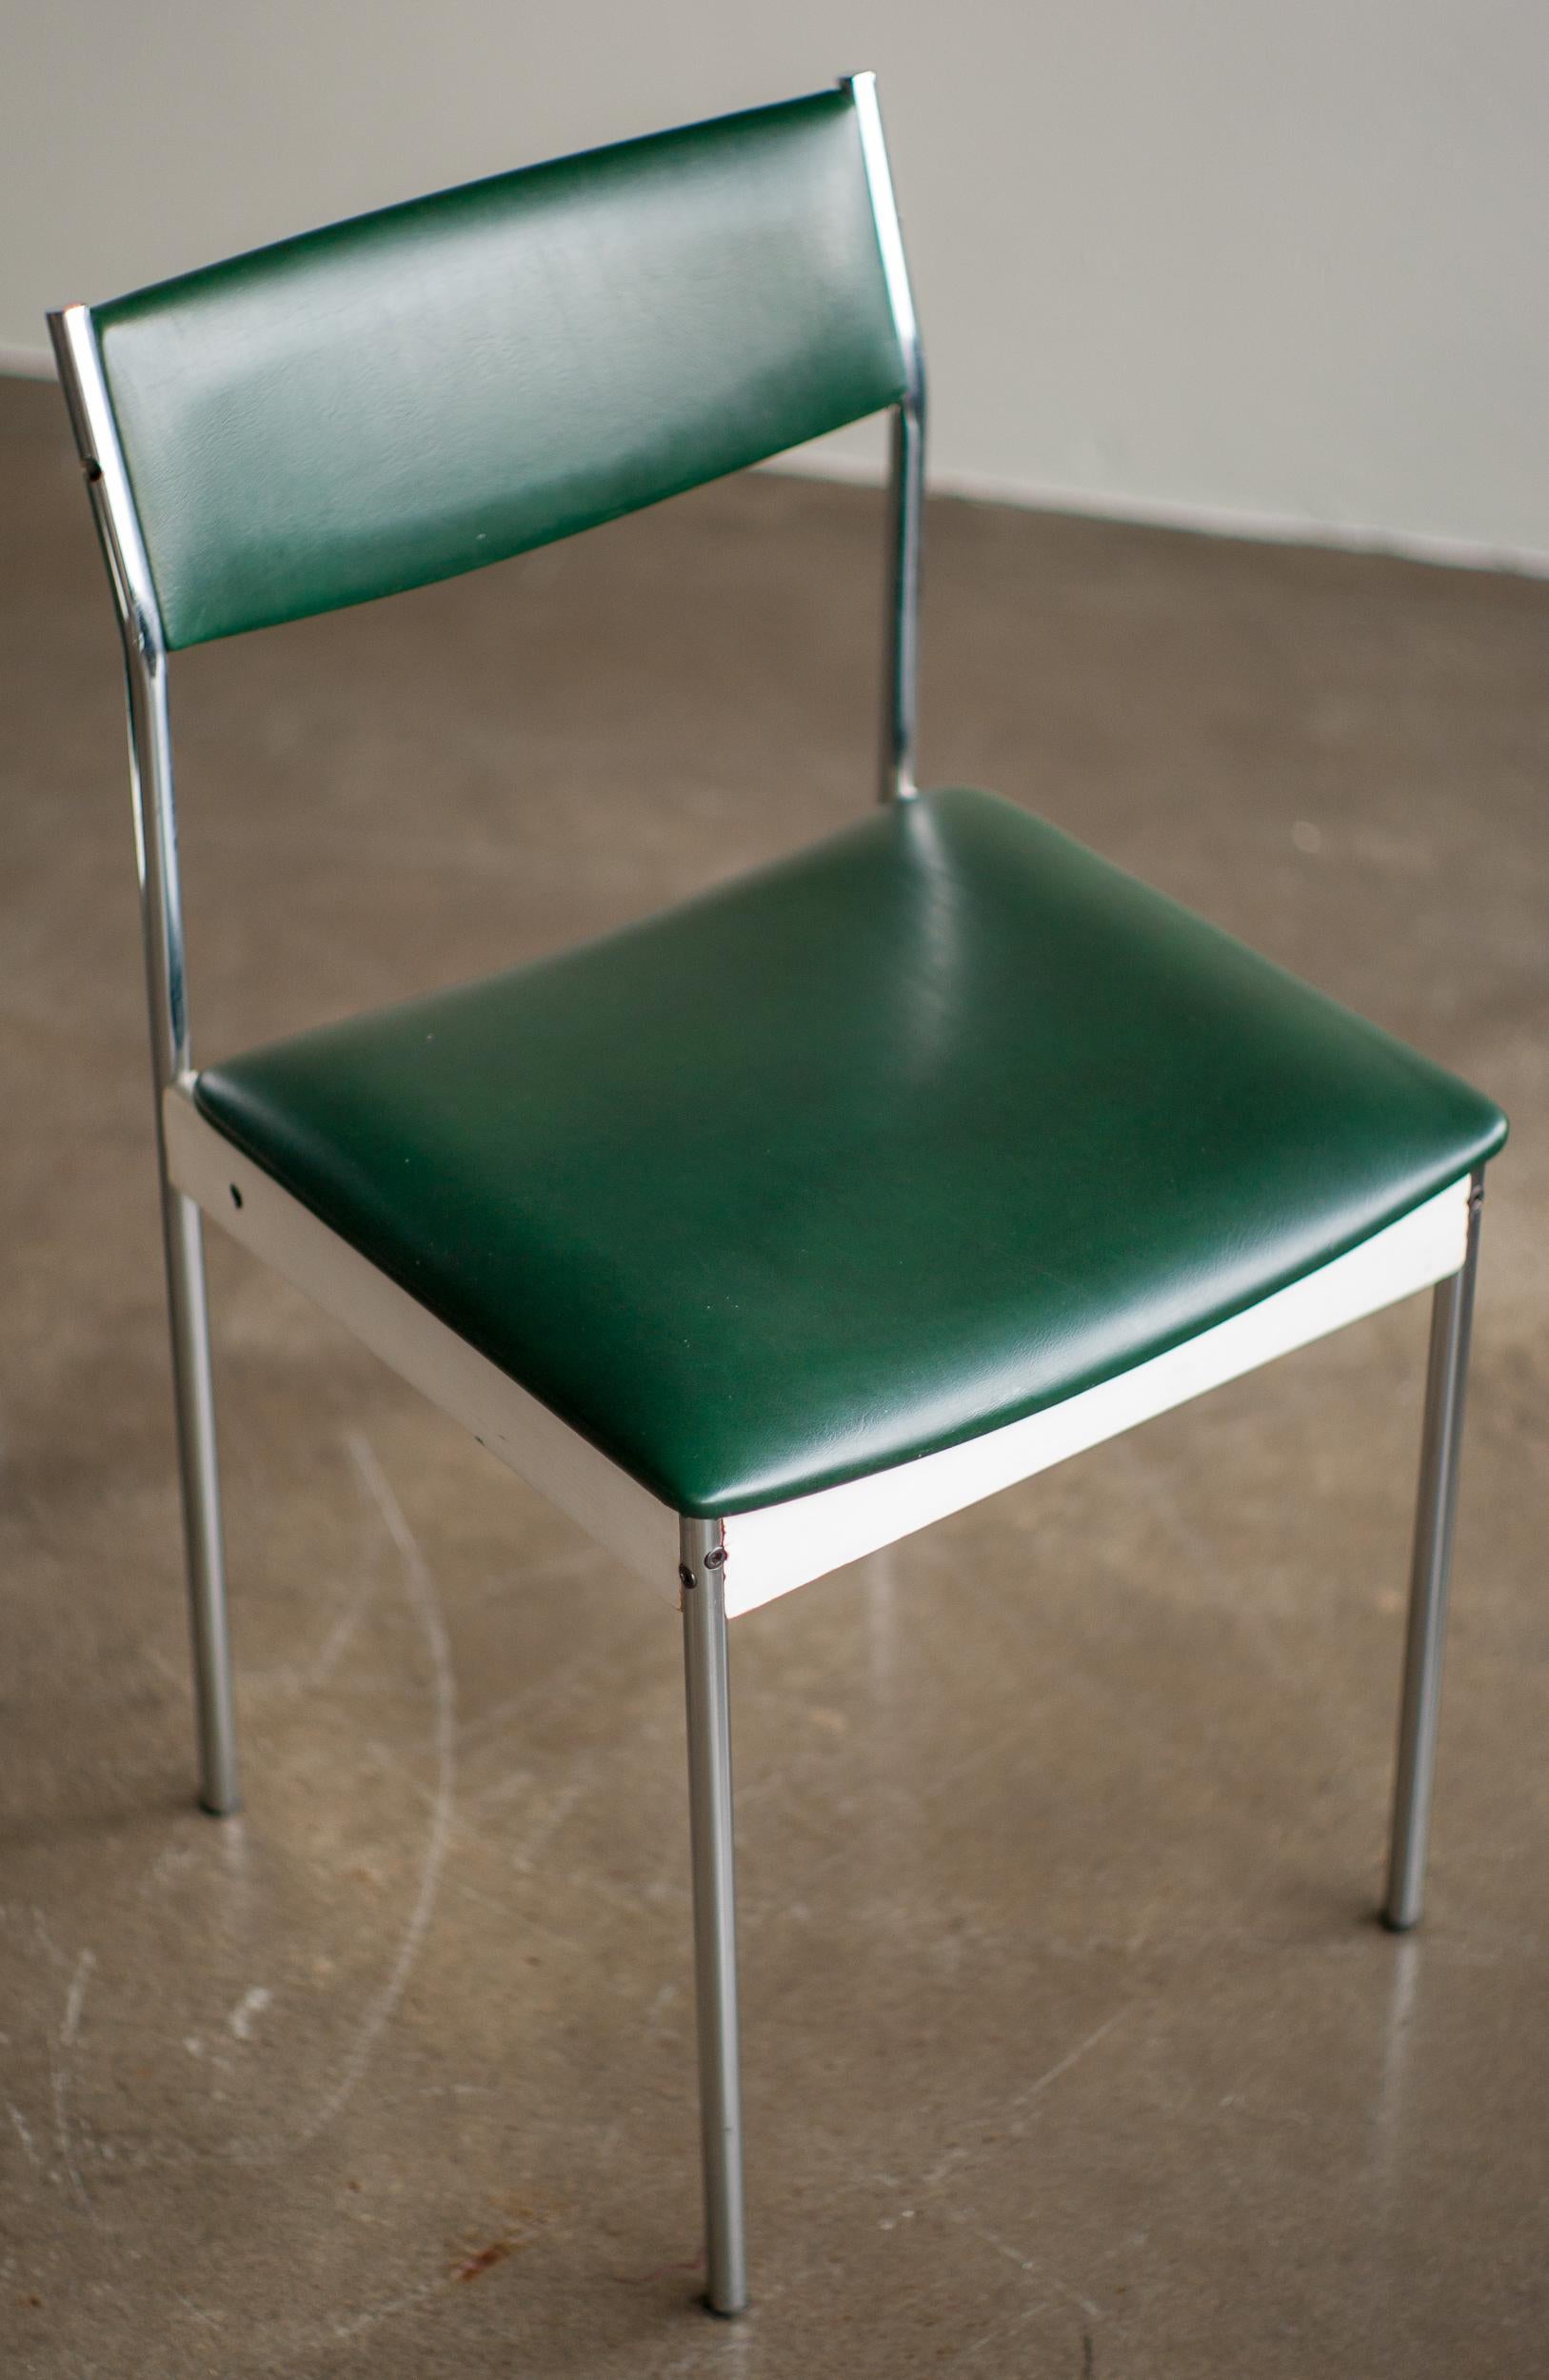 Minimalist but very comfortable Mid-Century Modern matching set of 4 dining chars with chrome plated tubular steel legs and white lacquered plywood seat and back, upholstered in dark green Naugahyde. 
Patent pending stamp, unknown manufacturer and